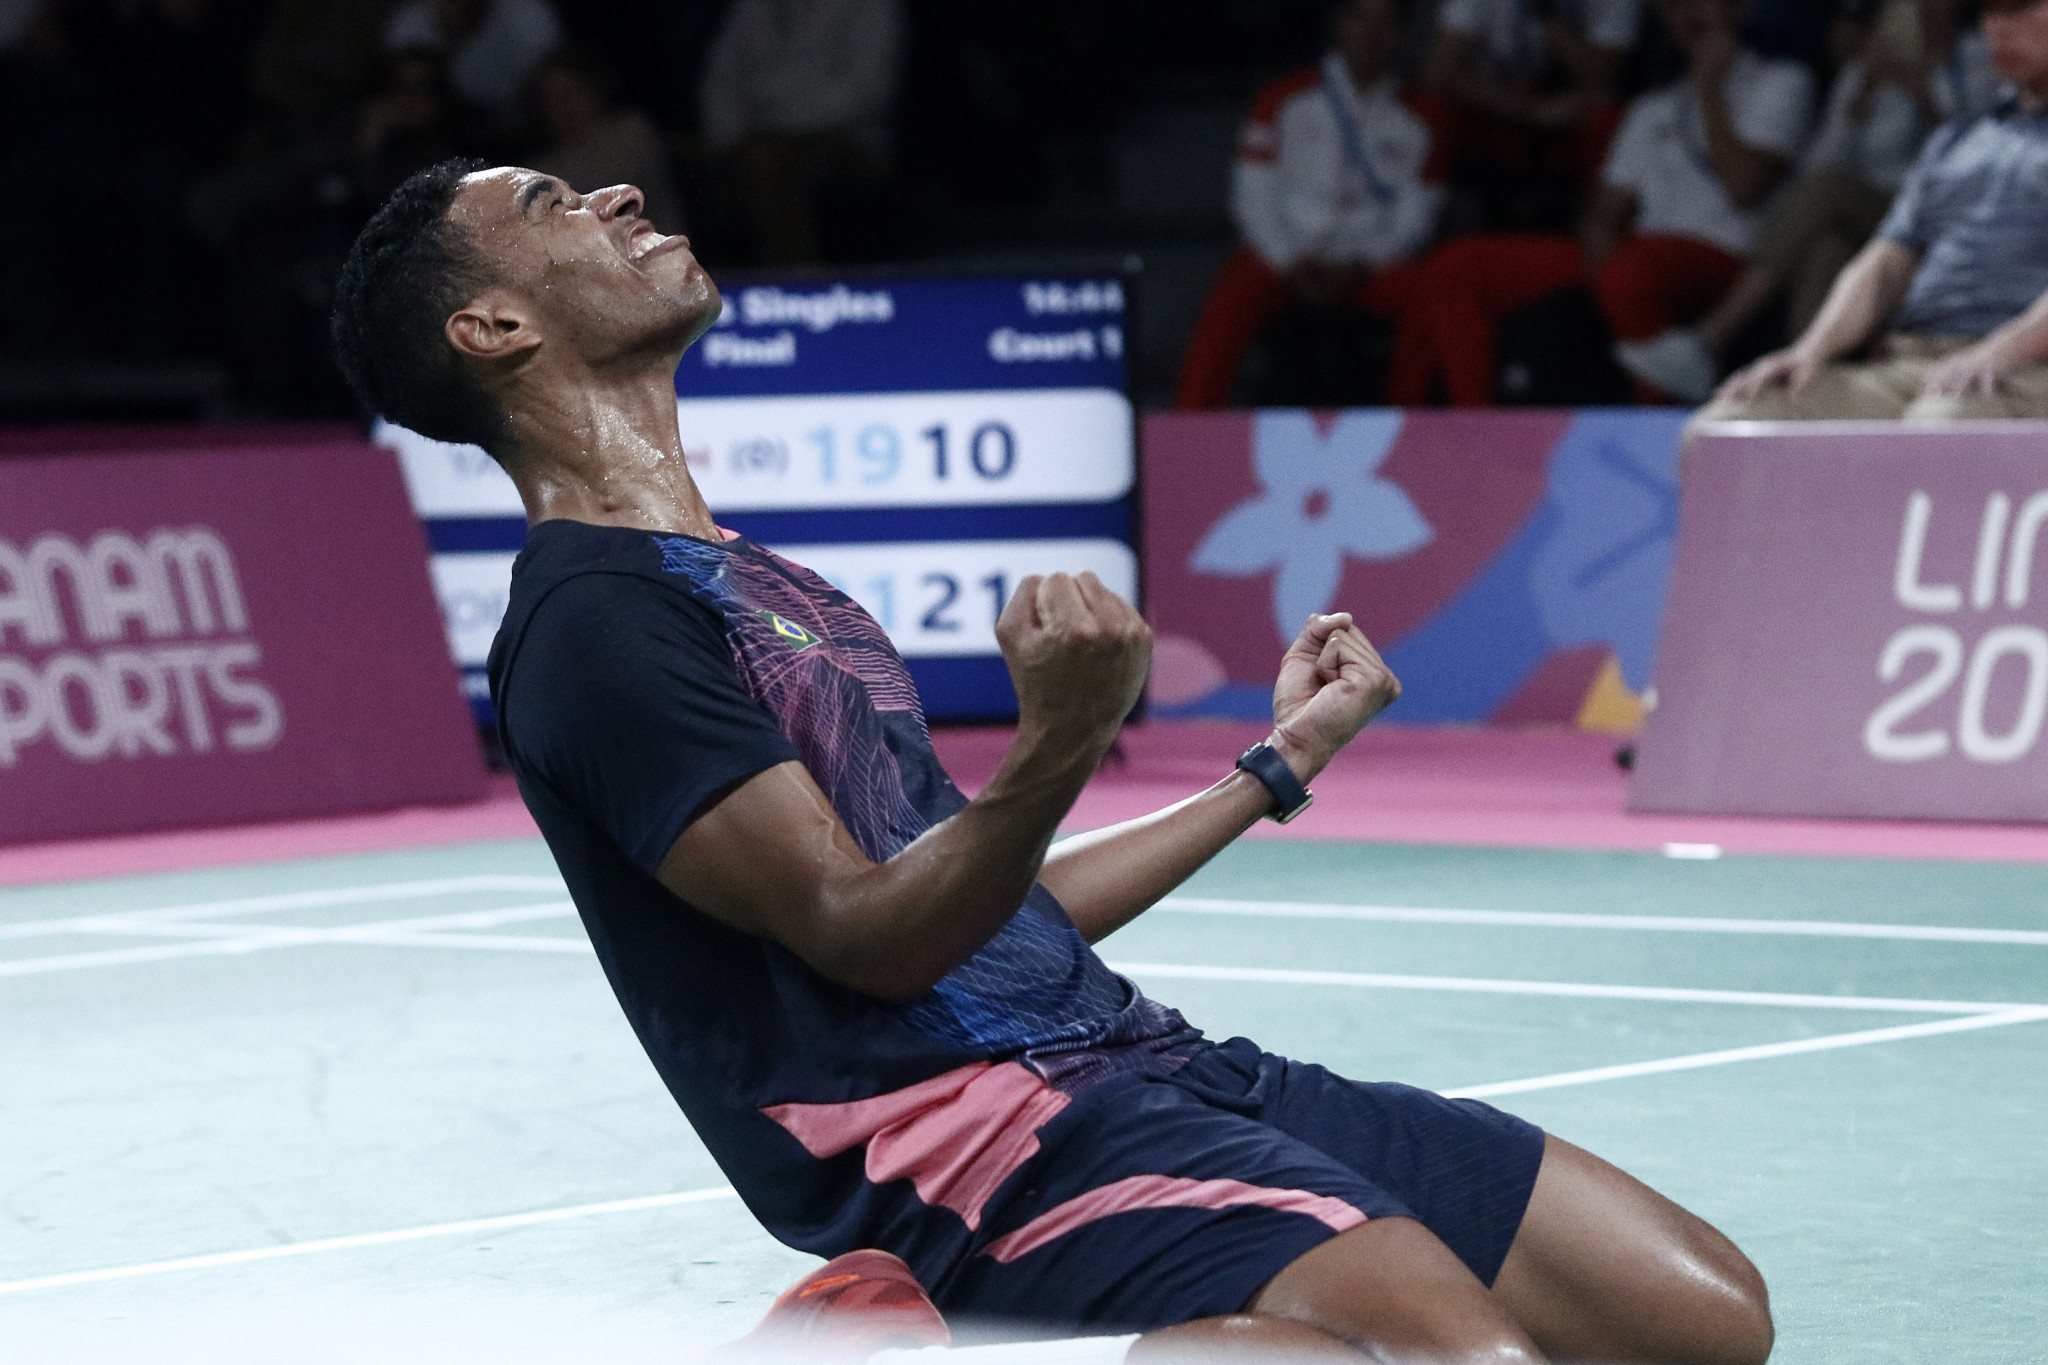 Brazil's Ygor Coelho was the only non-Canadian to manage badminton gold, triumphing in the men's singles ©Lima 2019